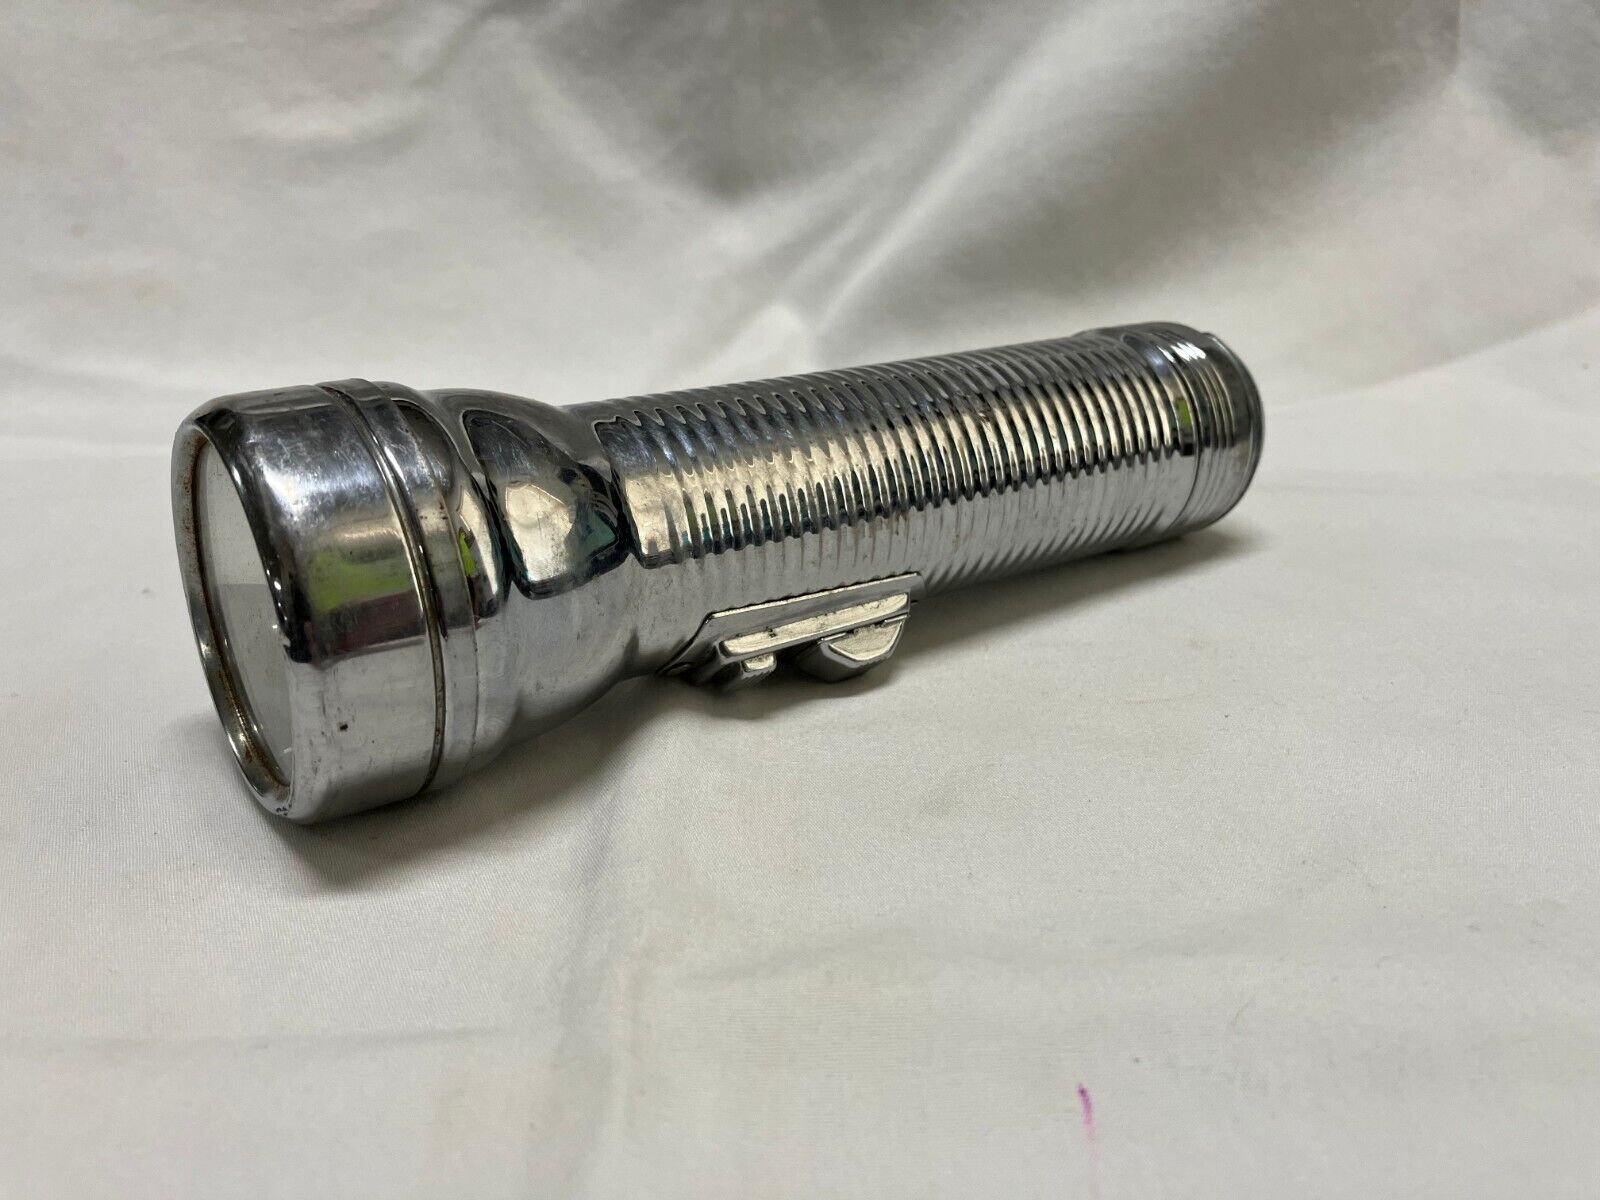 Vintage Hipco Flashlight All Metal 6.75 inch Tested Working